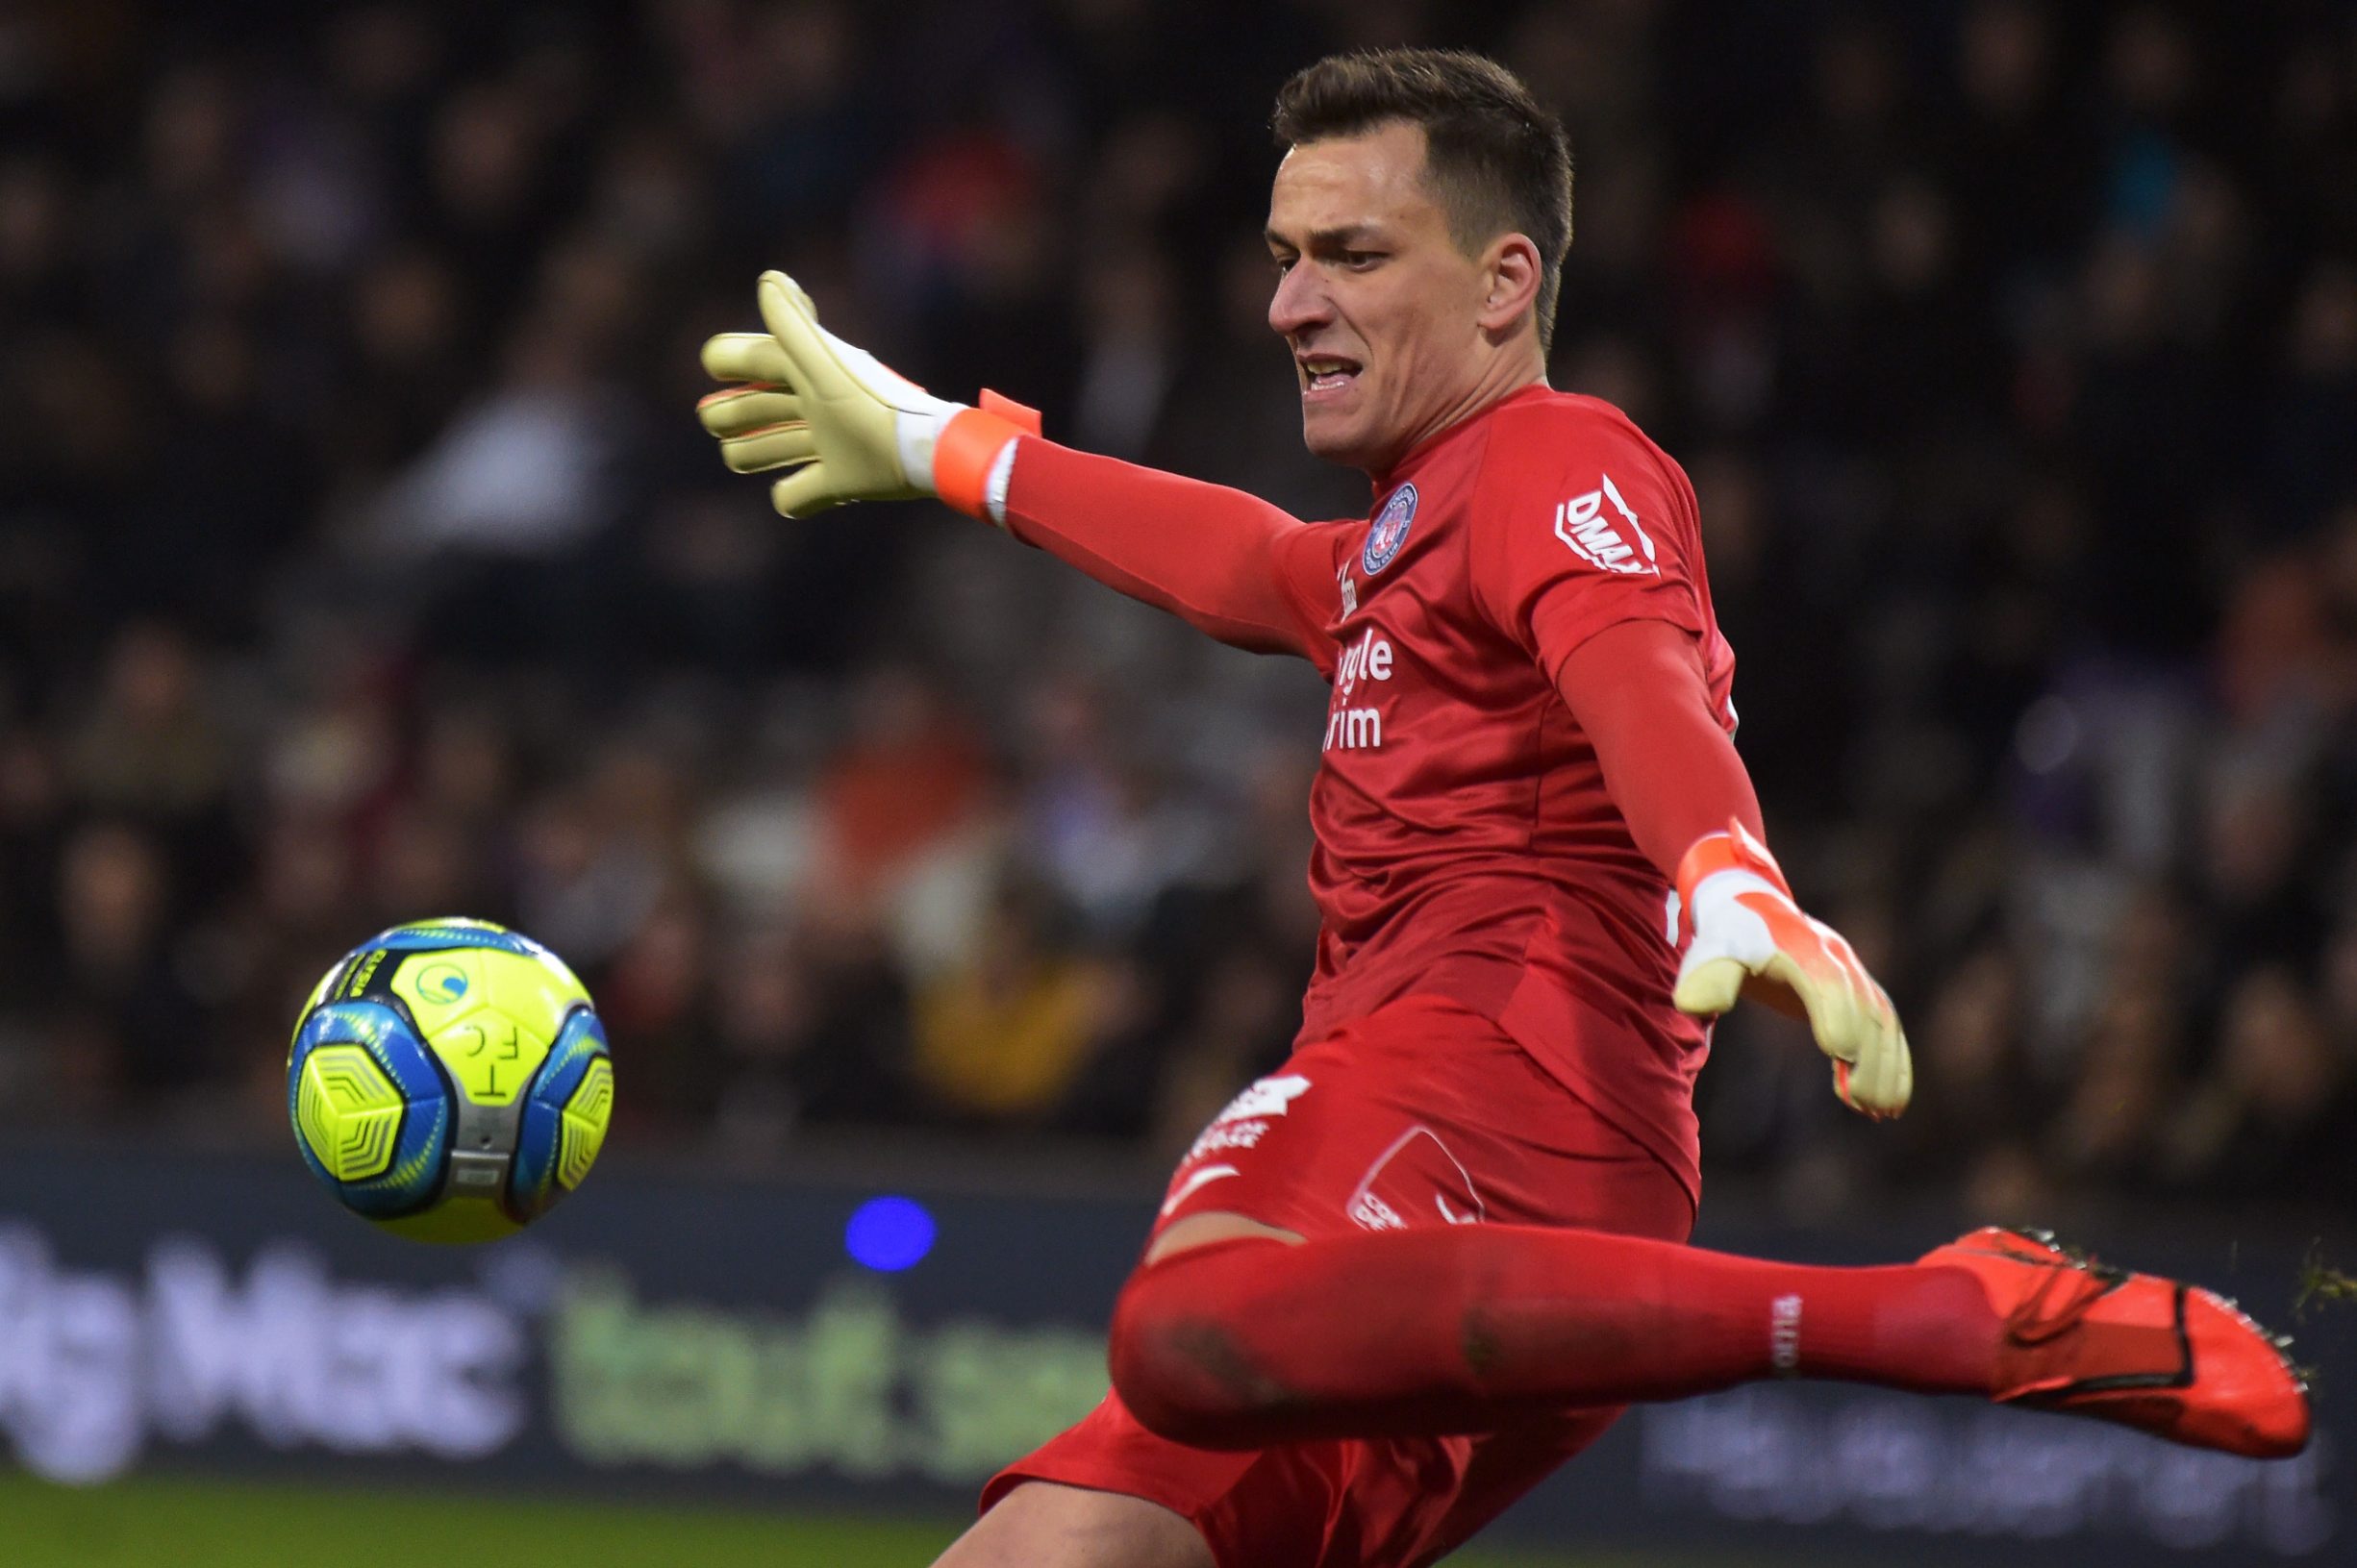 Toulouse's Croatian goalkeeper Lovre Kalinic kicks the ball during the French L1 football match between Toulouse (TFC)  and Strasbourg (RCSA) on February 5, 2020, at the Municipal Stadium in Toulouse, southern France. (Photo by PASCAL PAVANI / AFP)